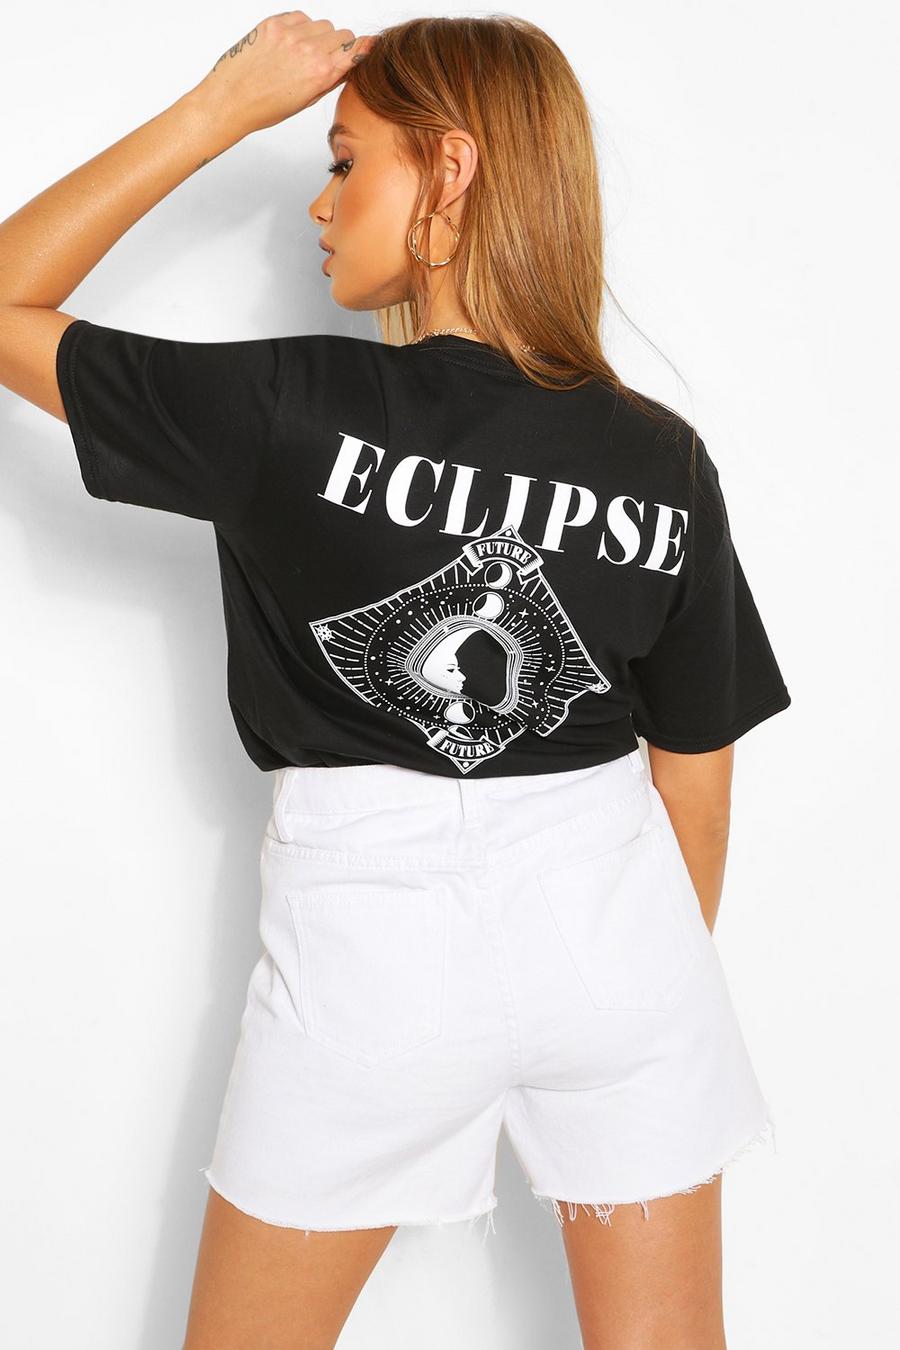 T-shirt con stampa posteriore “Eclipse”, Nero image number 1